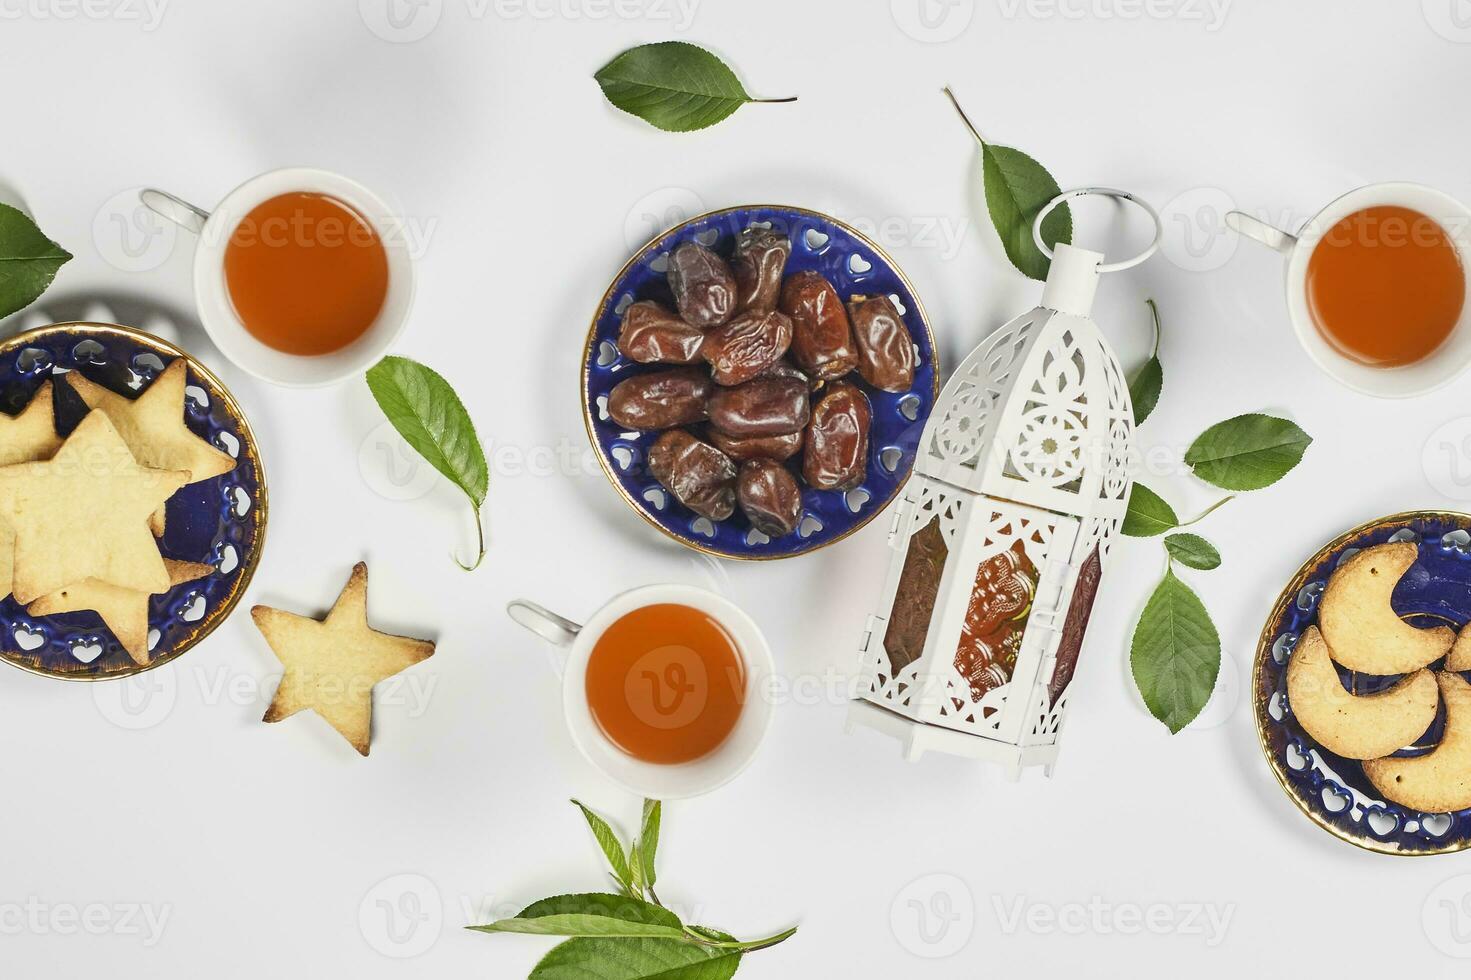 Iftar foods on white table. Traditional middle-eastern lunch with cookies and sweets photo